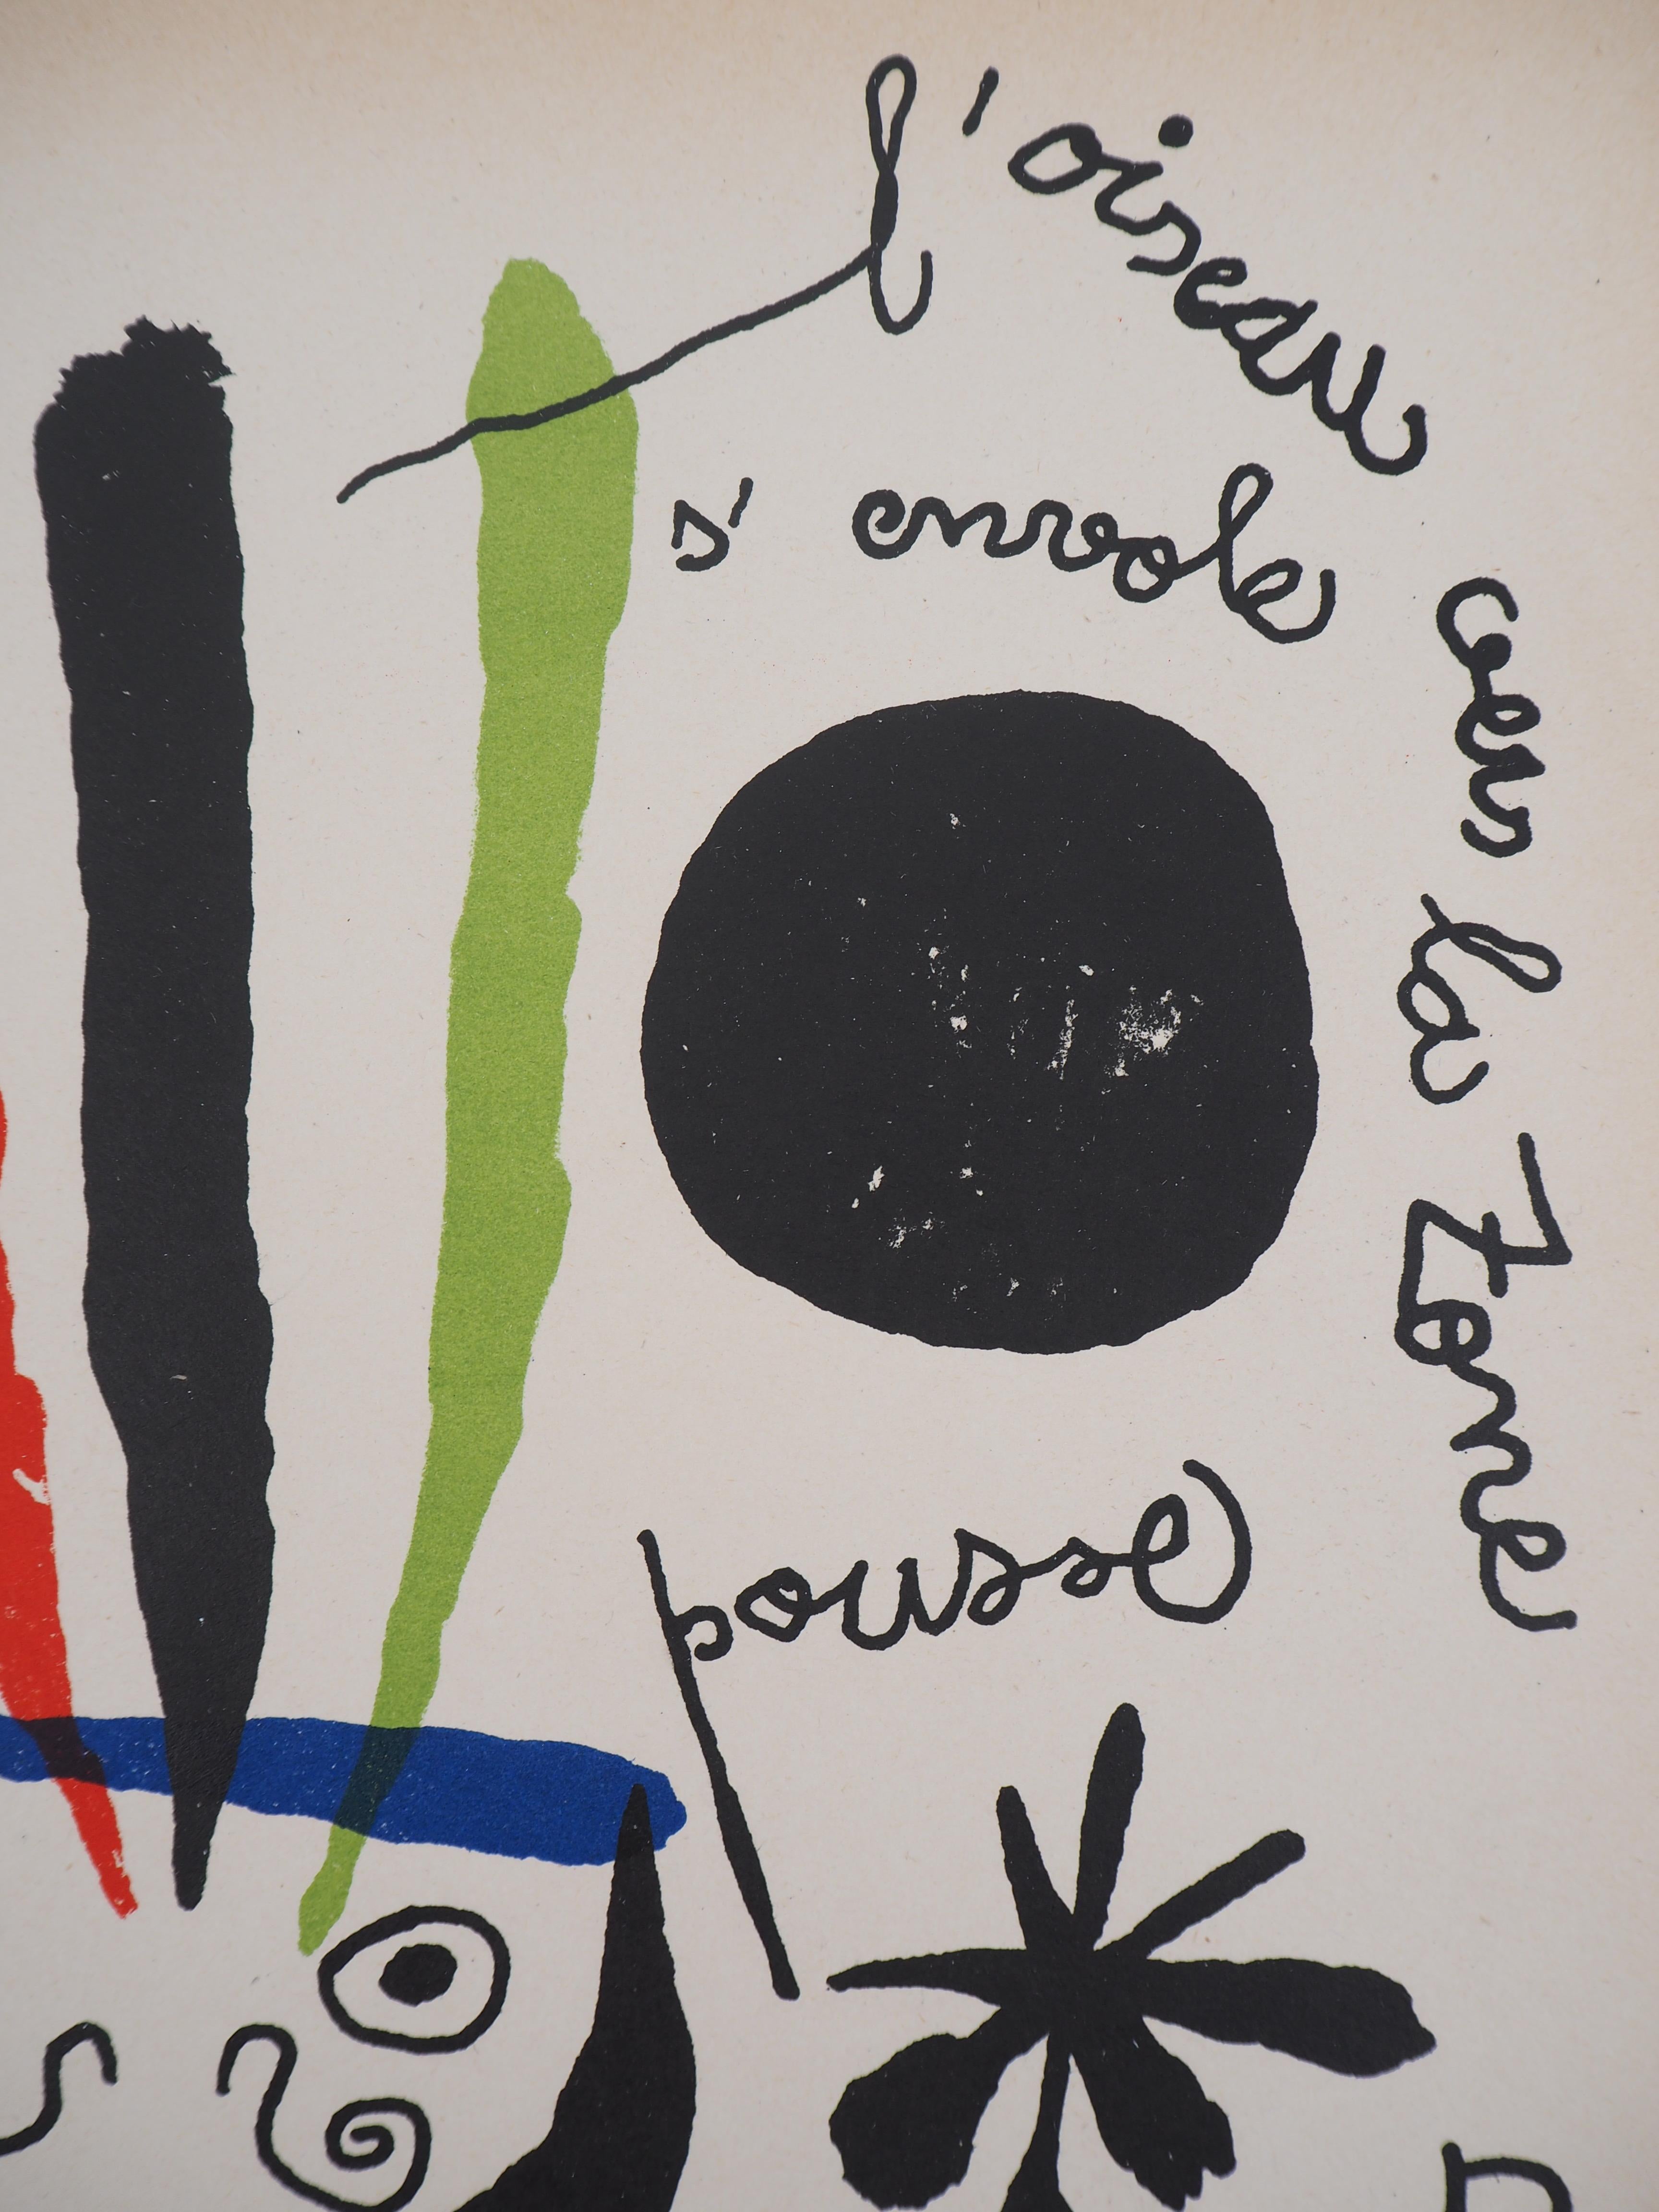 Joan MIRO
The Bird, 1952

Original Lithograph (5 color stones)
Printed in Mourlot workshop
On vellum 31 x 23 cm (c. 12,2 x 9,4 in)
Edited by San Lazzaro in 1952

REFERENCES : Catalog raisonne Mourlot / Maeght #185

Very good condition, edge of the